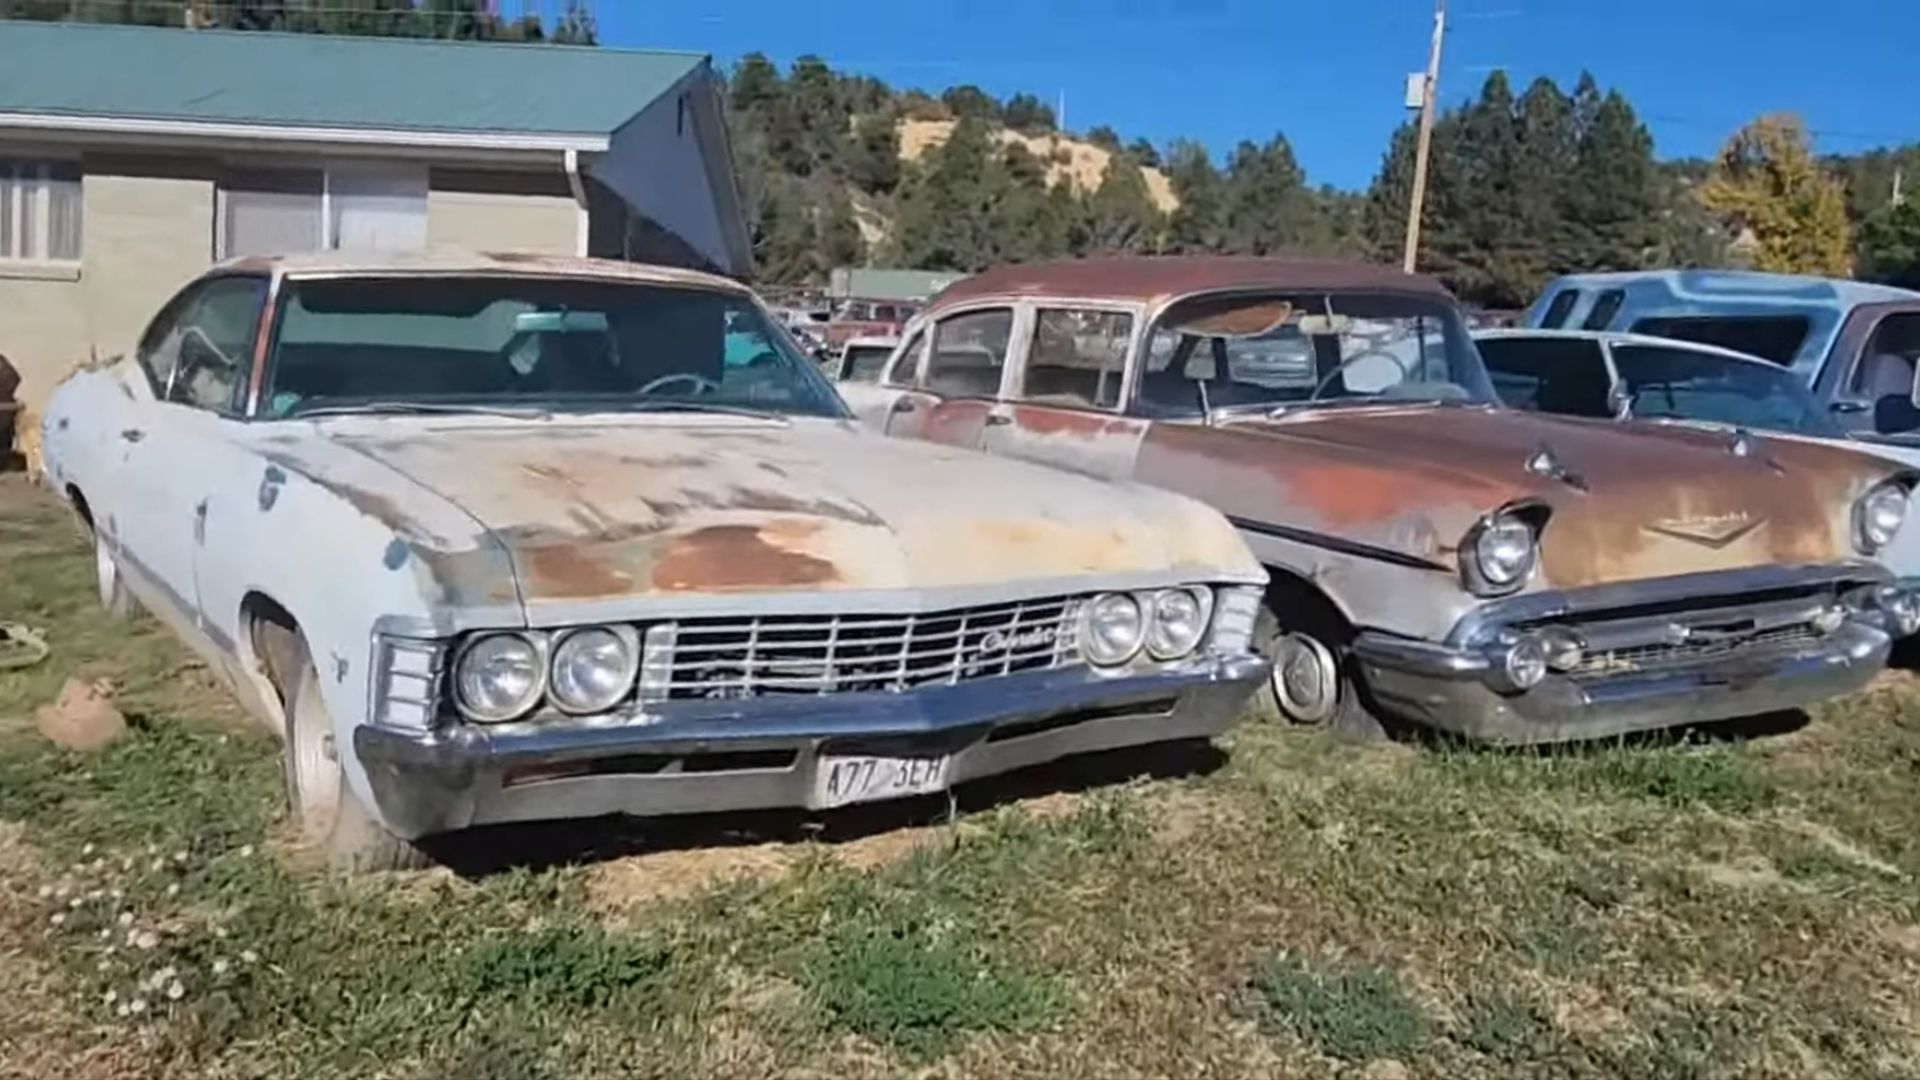 This Outstanding Mopar Ranch Hides A Rare And Wild Muscle Car